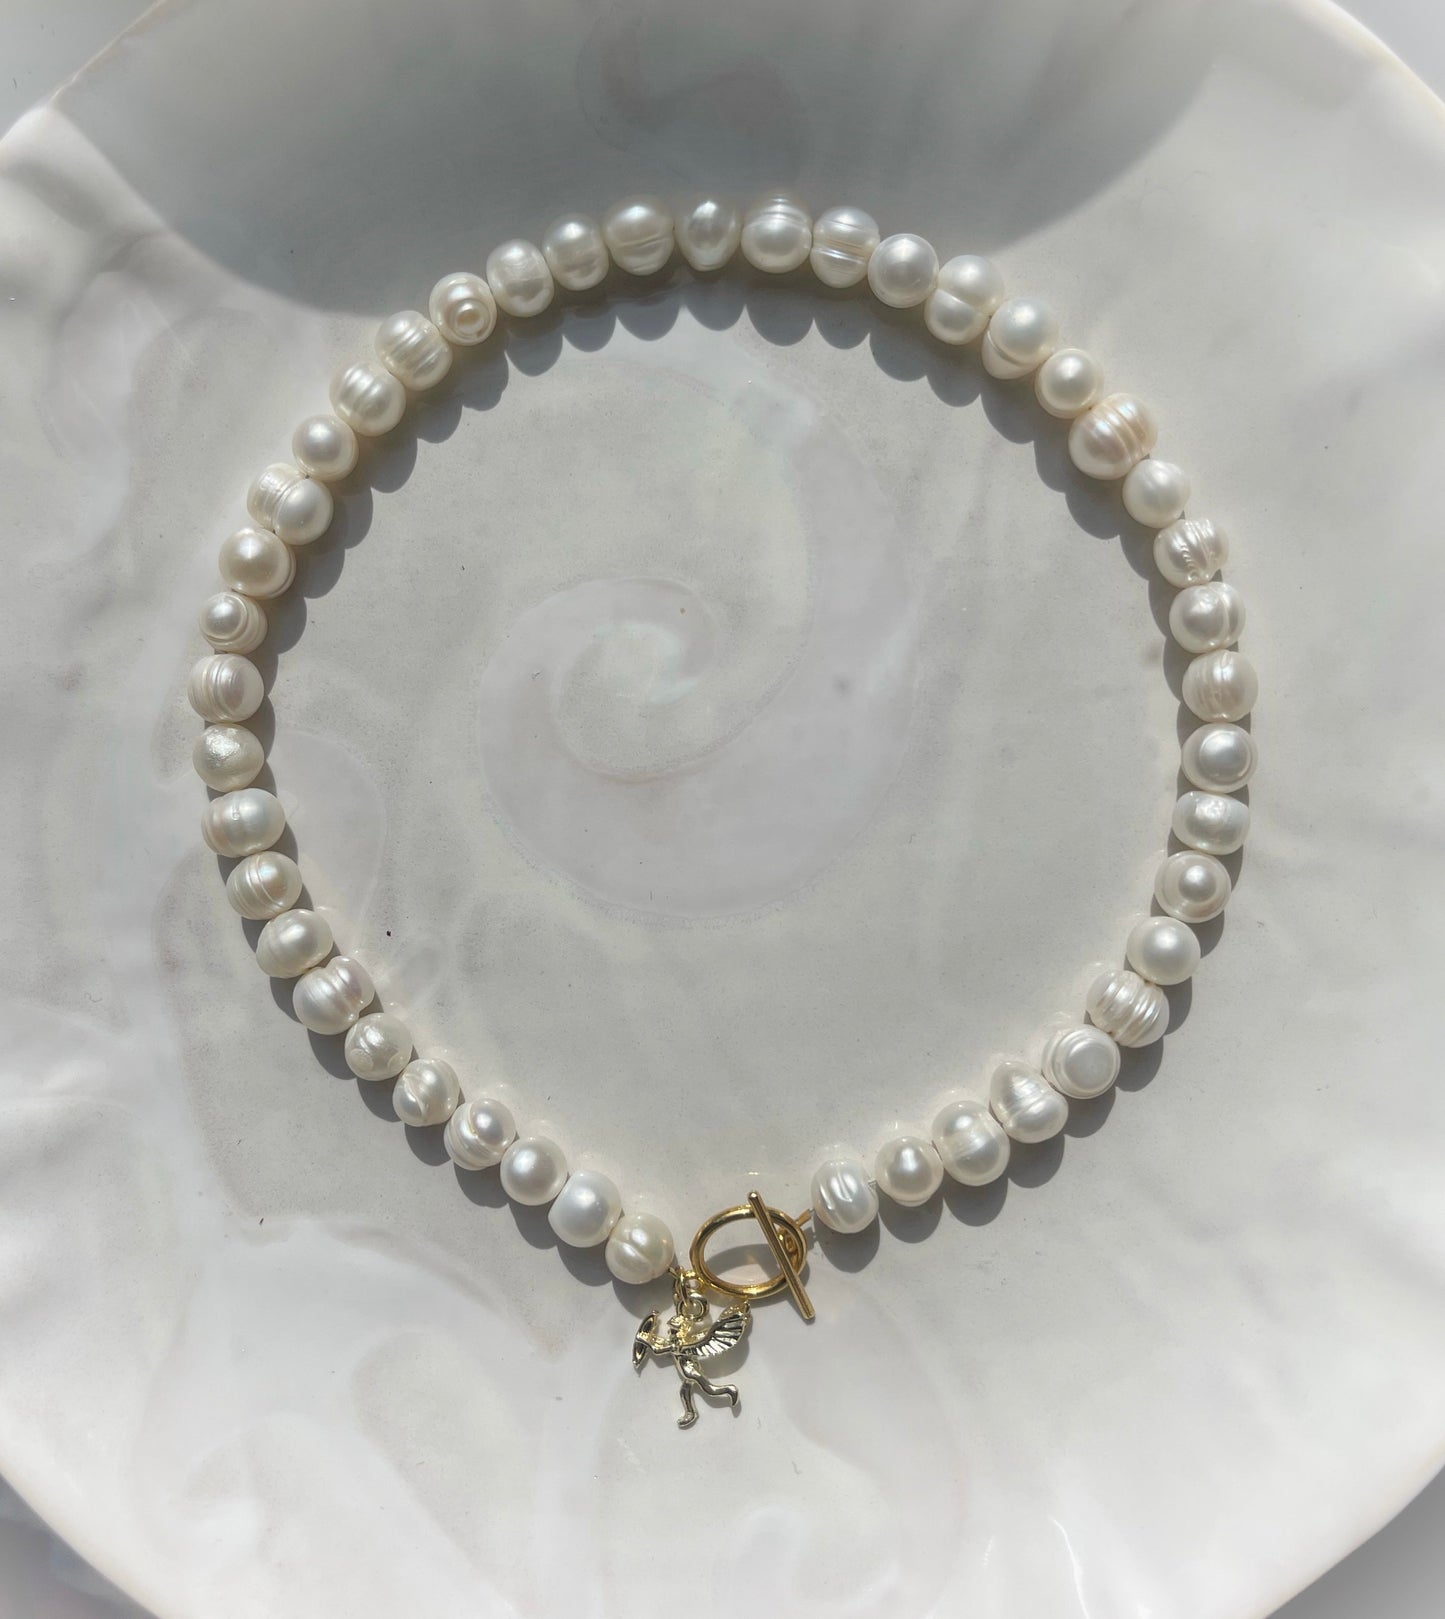 White pearl charm necklace and bracelet matching set with dainty gold Cupid / cherub charm, classic white pearl jewelry, summer jewelry